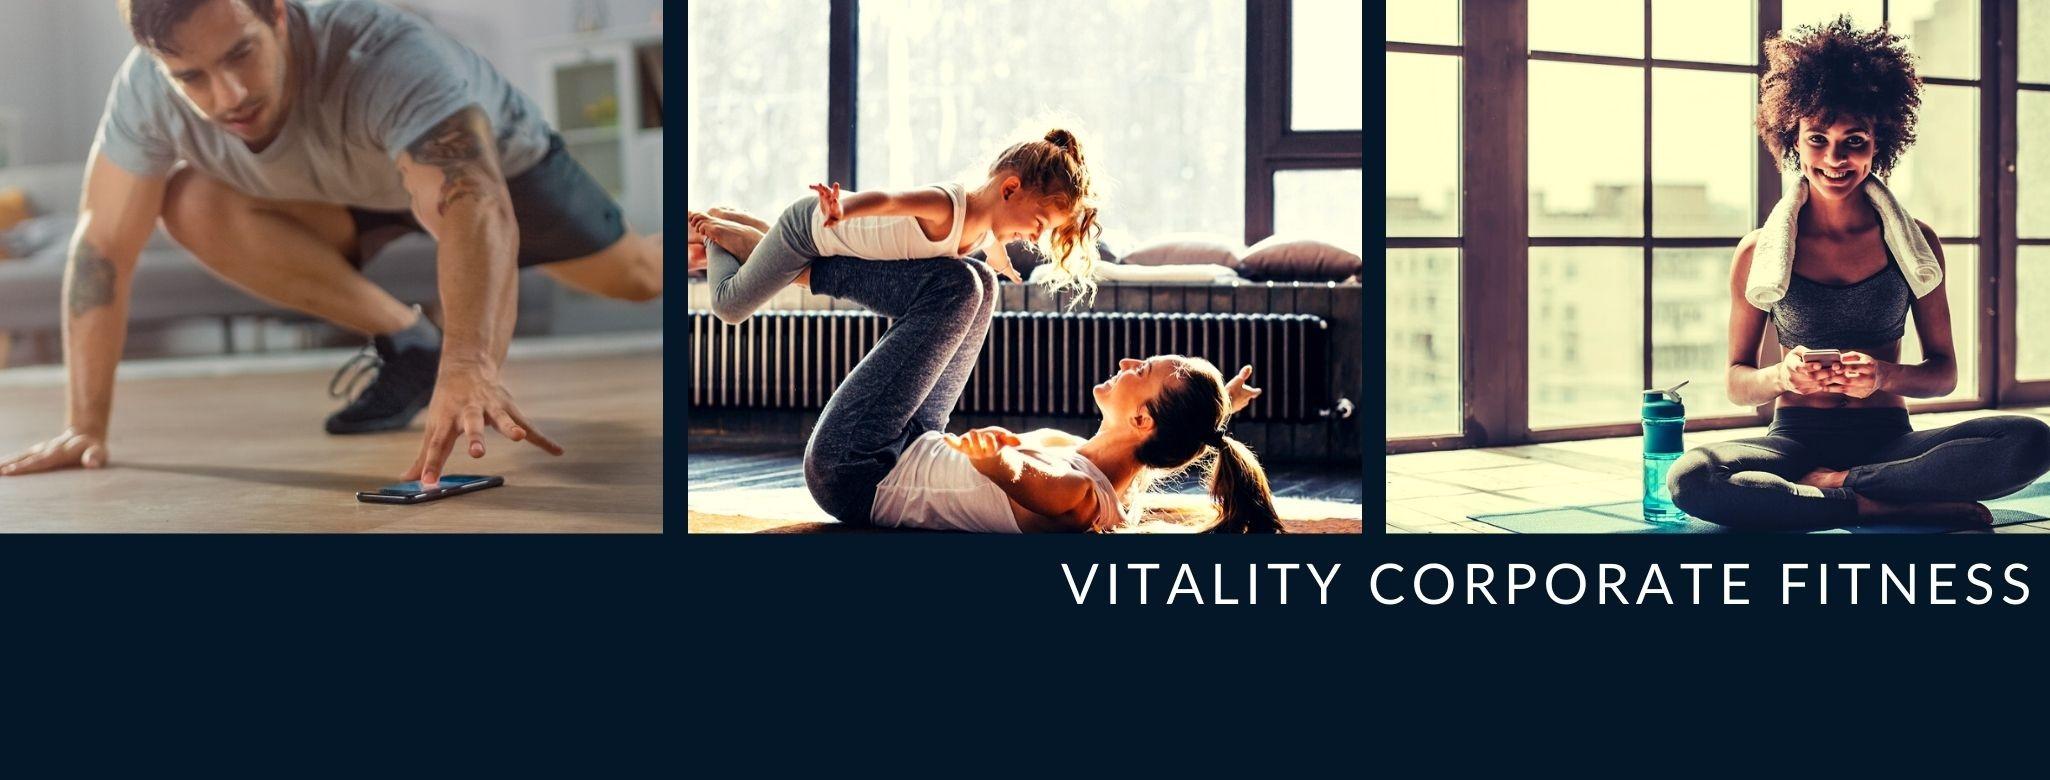 Review Vitality Corporate Fitness: Personalised Trainign from Anywhere - Appvizer